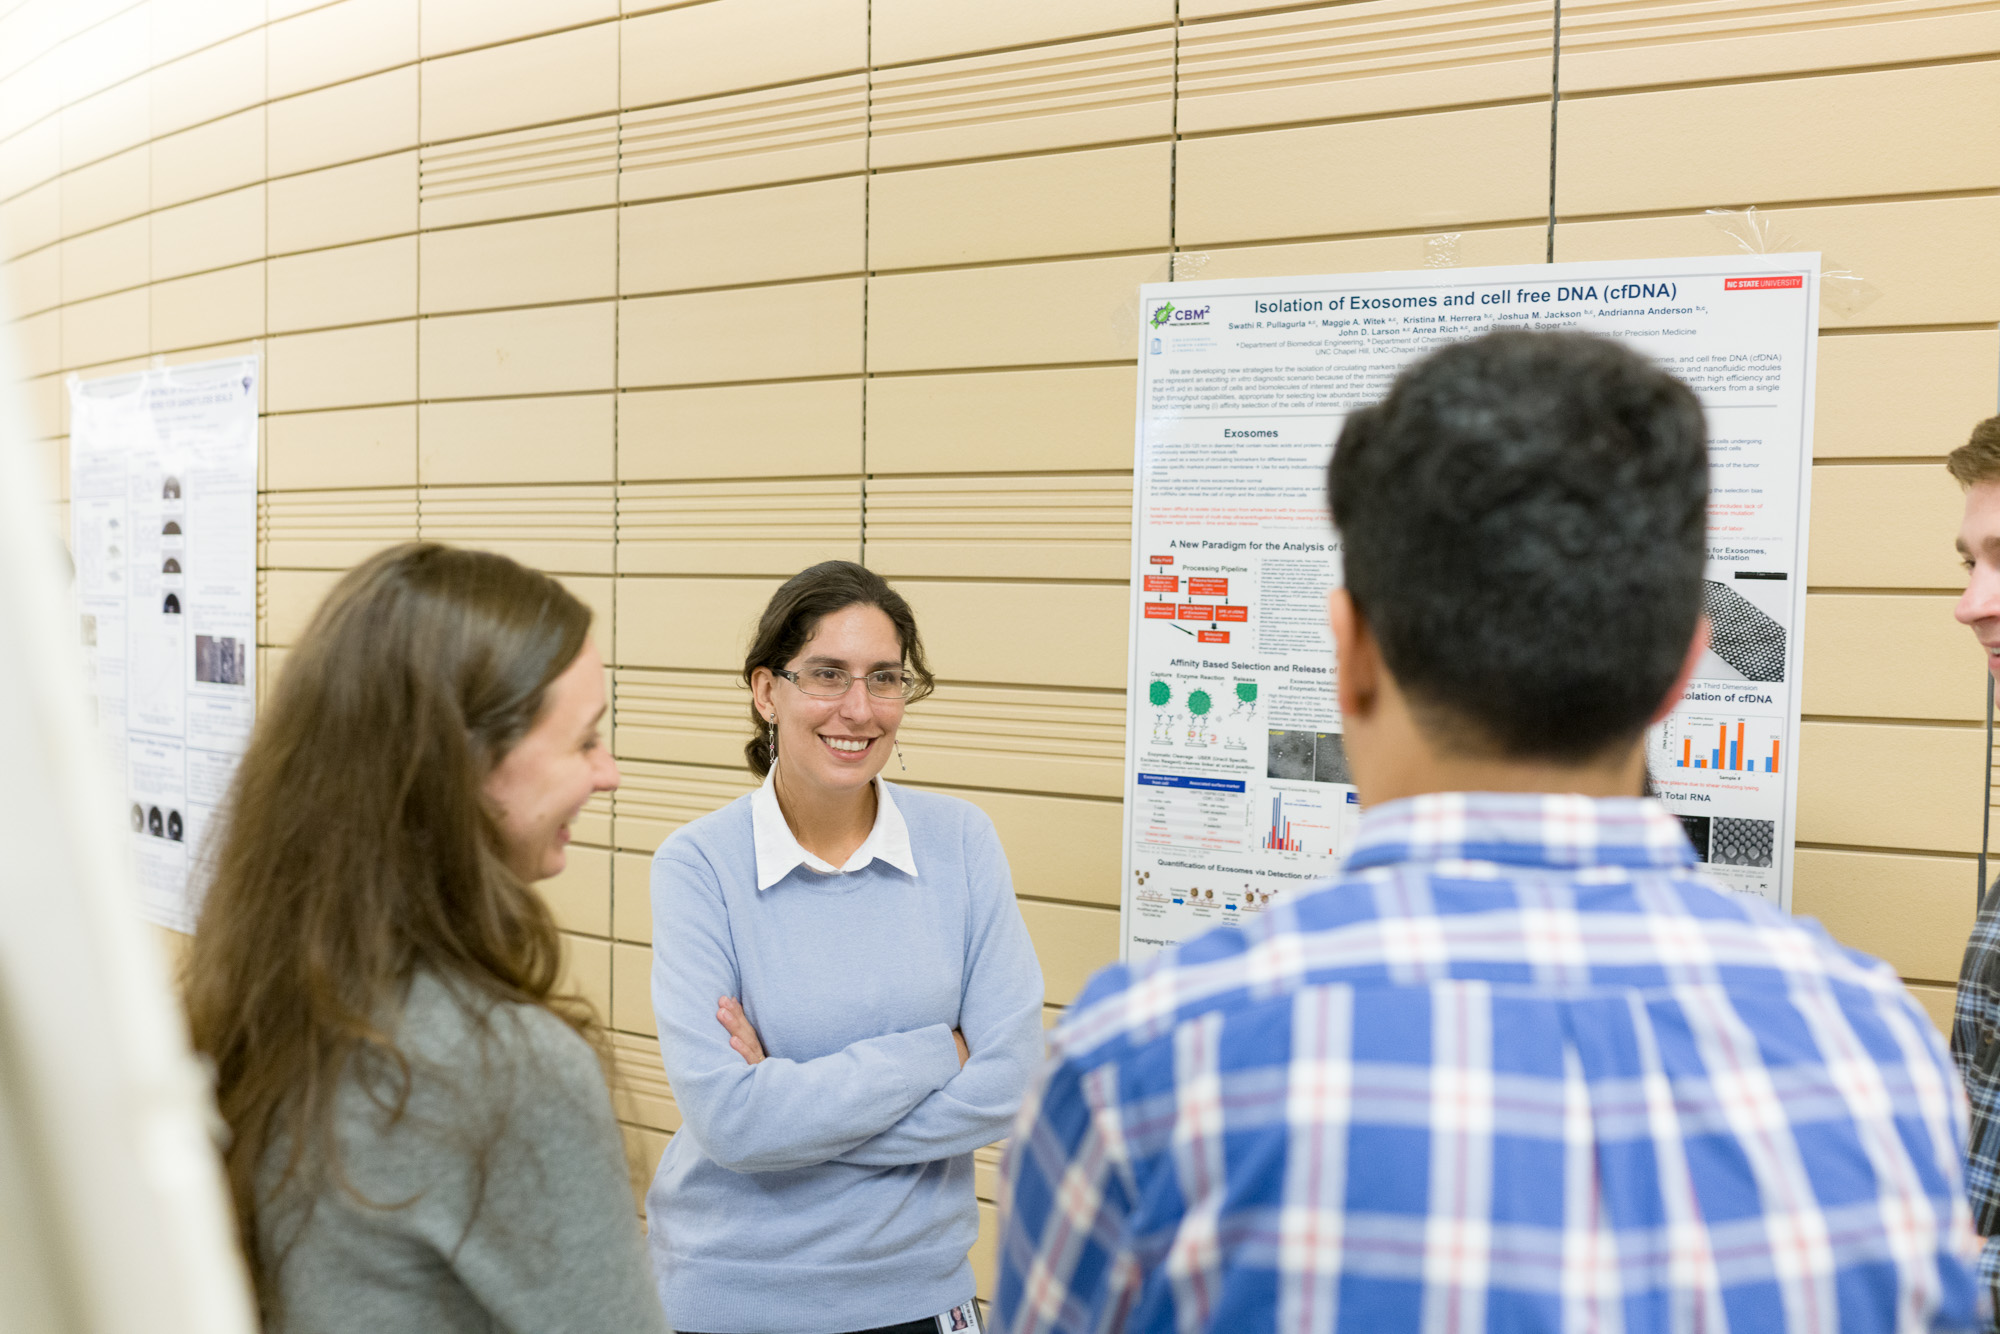 A group discusses a scientific poster on exosomes and cell-free DNA. A woman in a light blue sweater interacts with others in an academic setting.